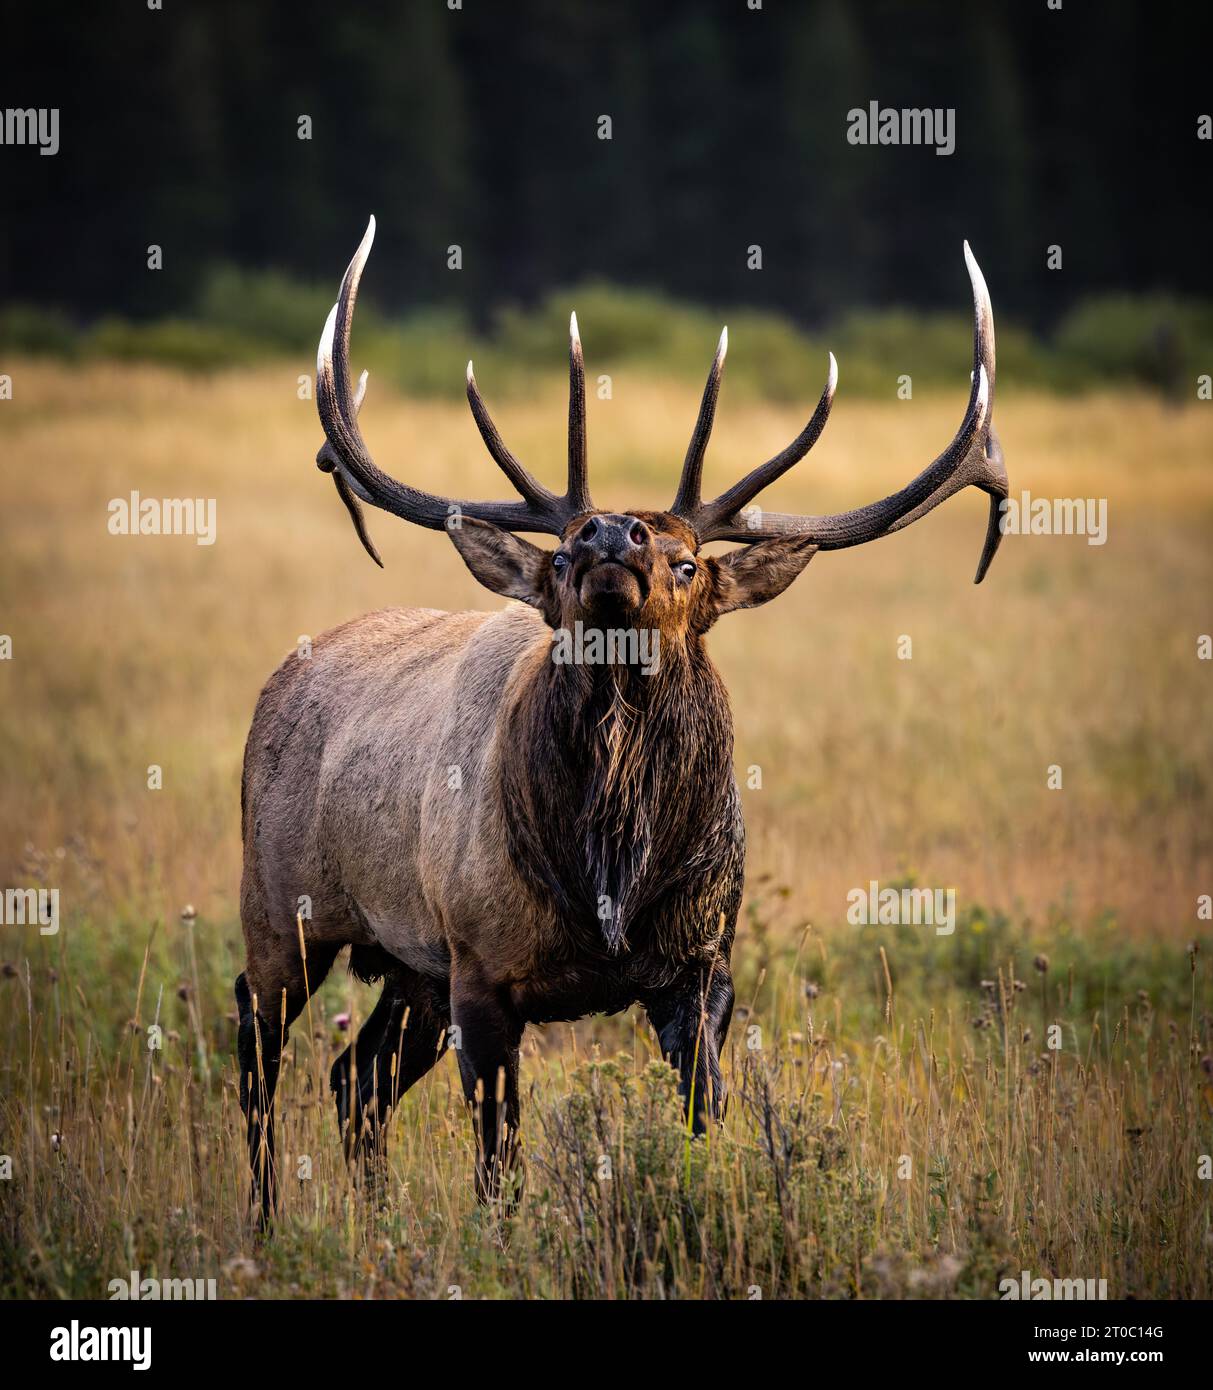 Bull Rocky Mountain Elk - cervus canadensis - standing in grass meadow tilting head back during fall elk rut, Rocky Mountain National Park, Colorado Stock Photo